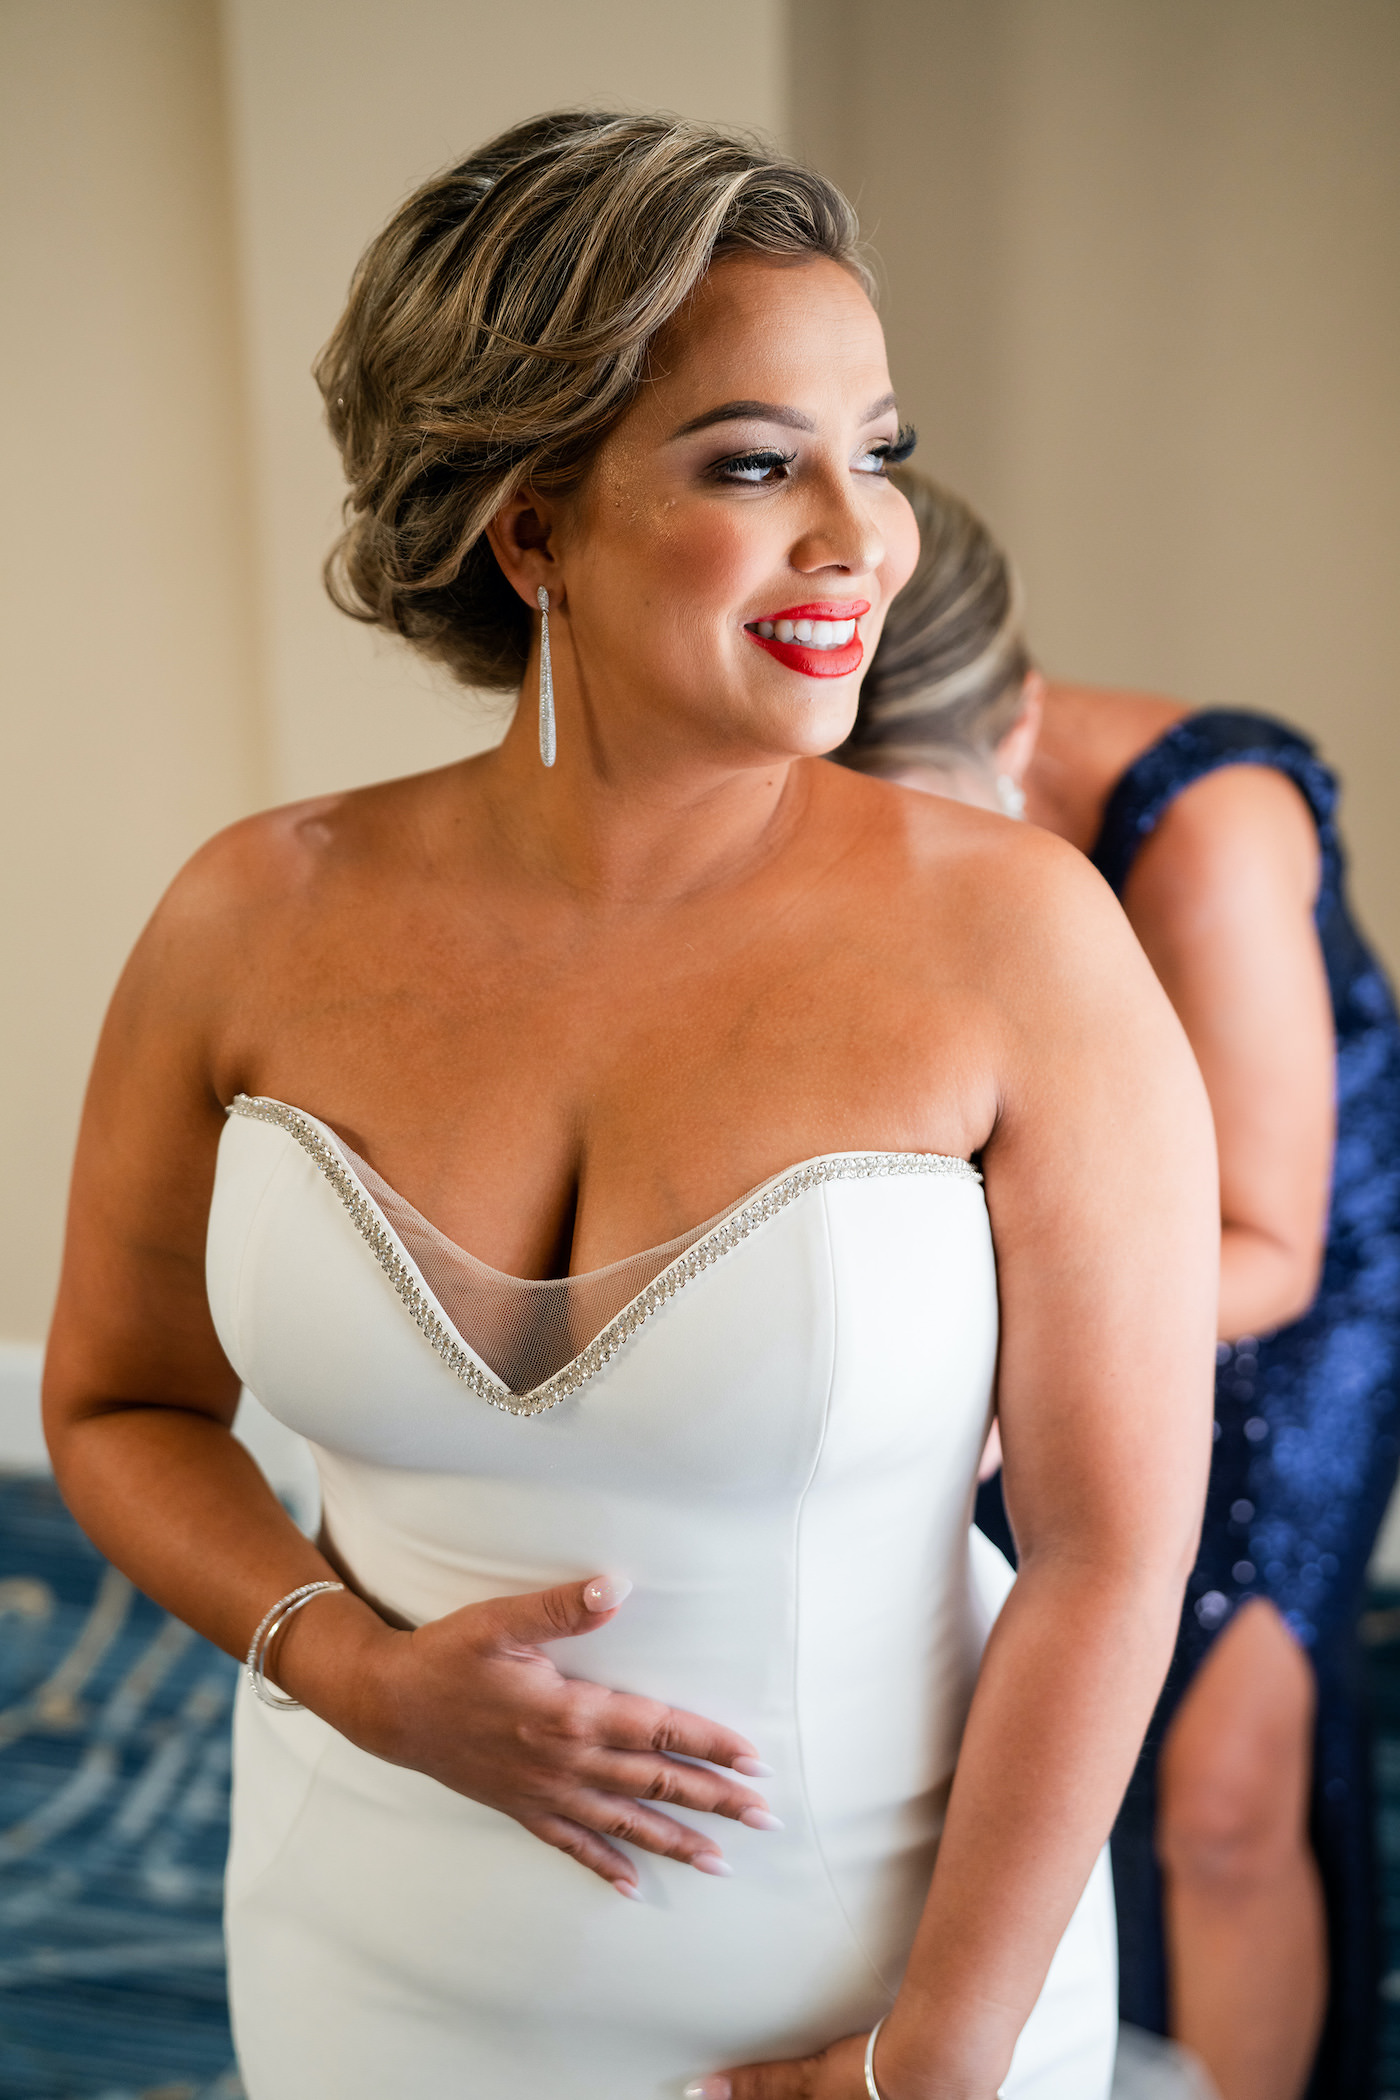 Romantic Clearwater Beach Bride Getting Ready in White Strapless Wedding Dress | Florida Wedding Hair and Makeup Artist Michele Renee The Studio